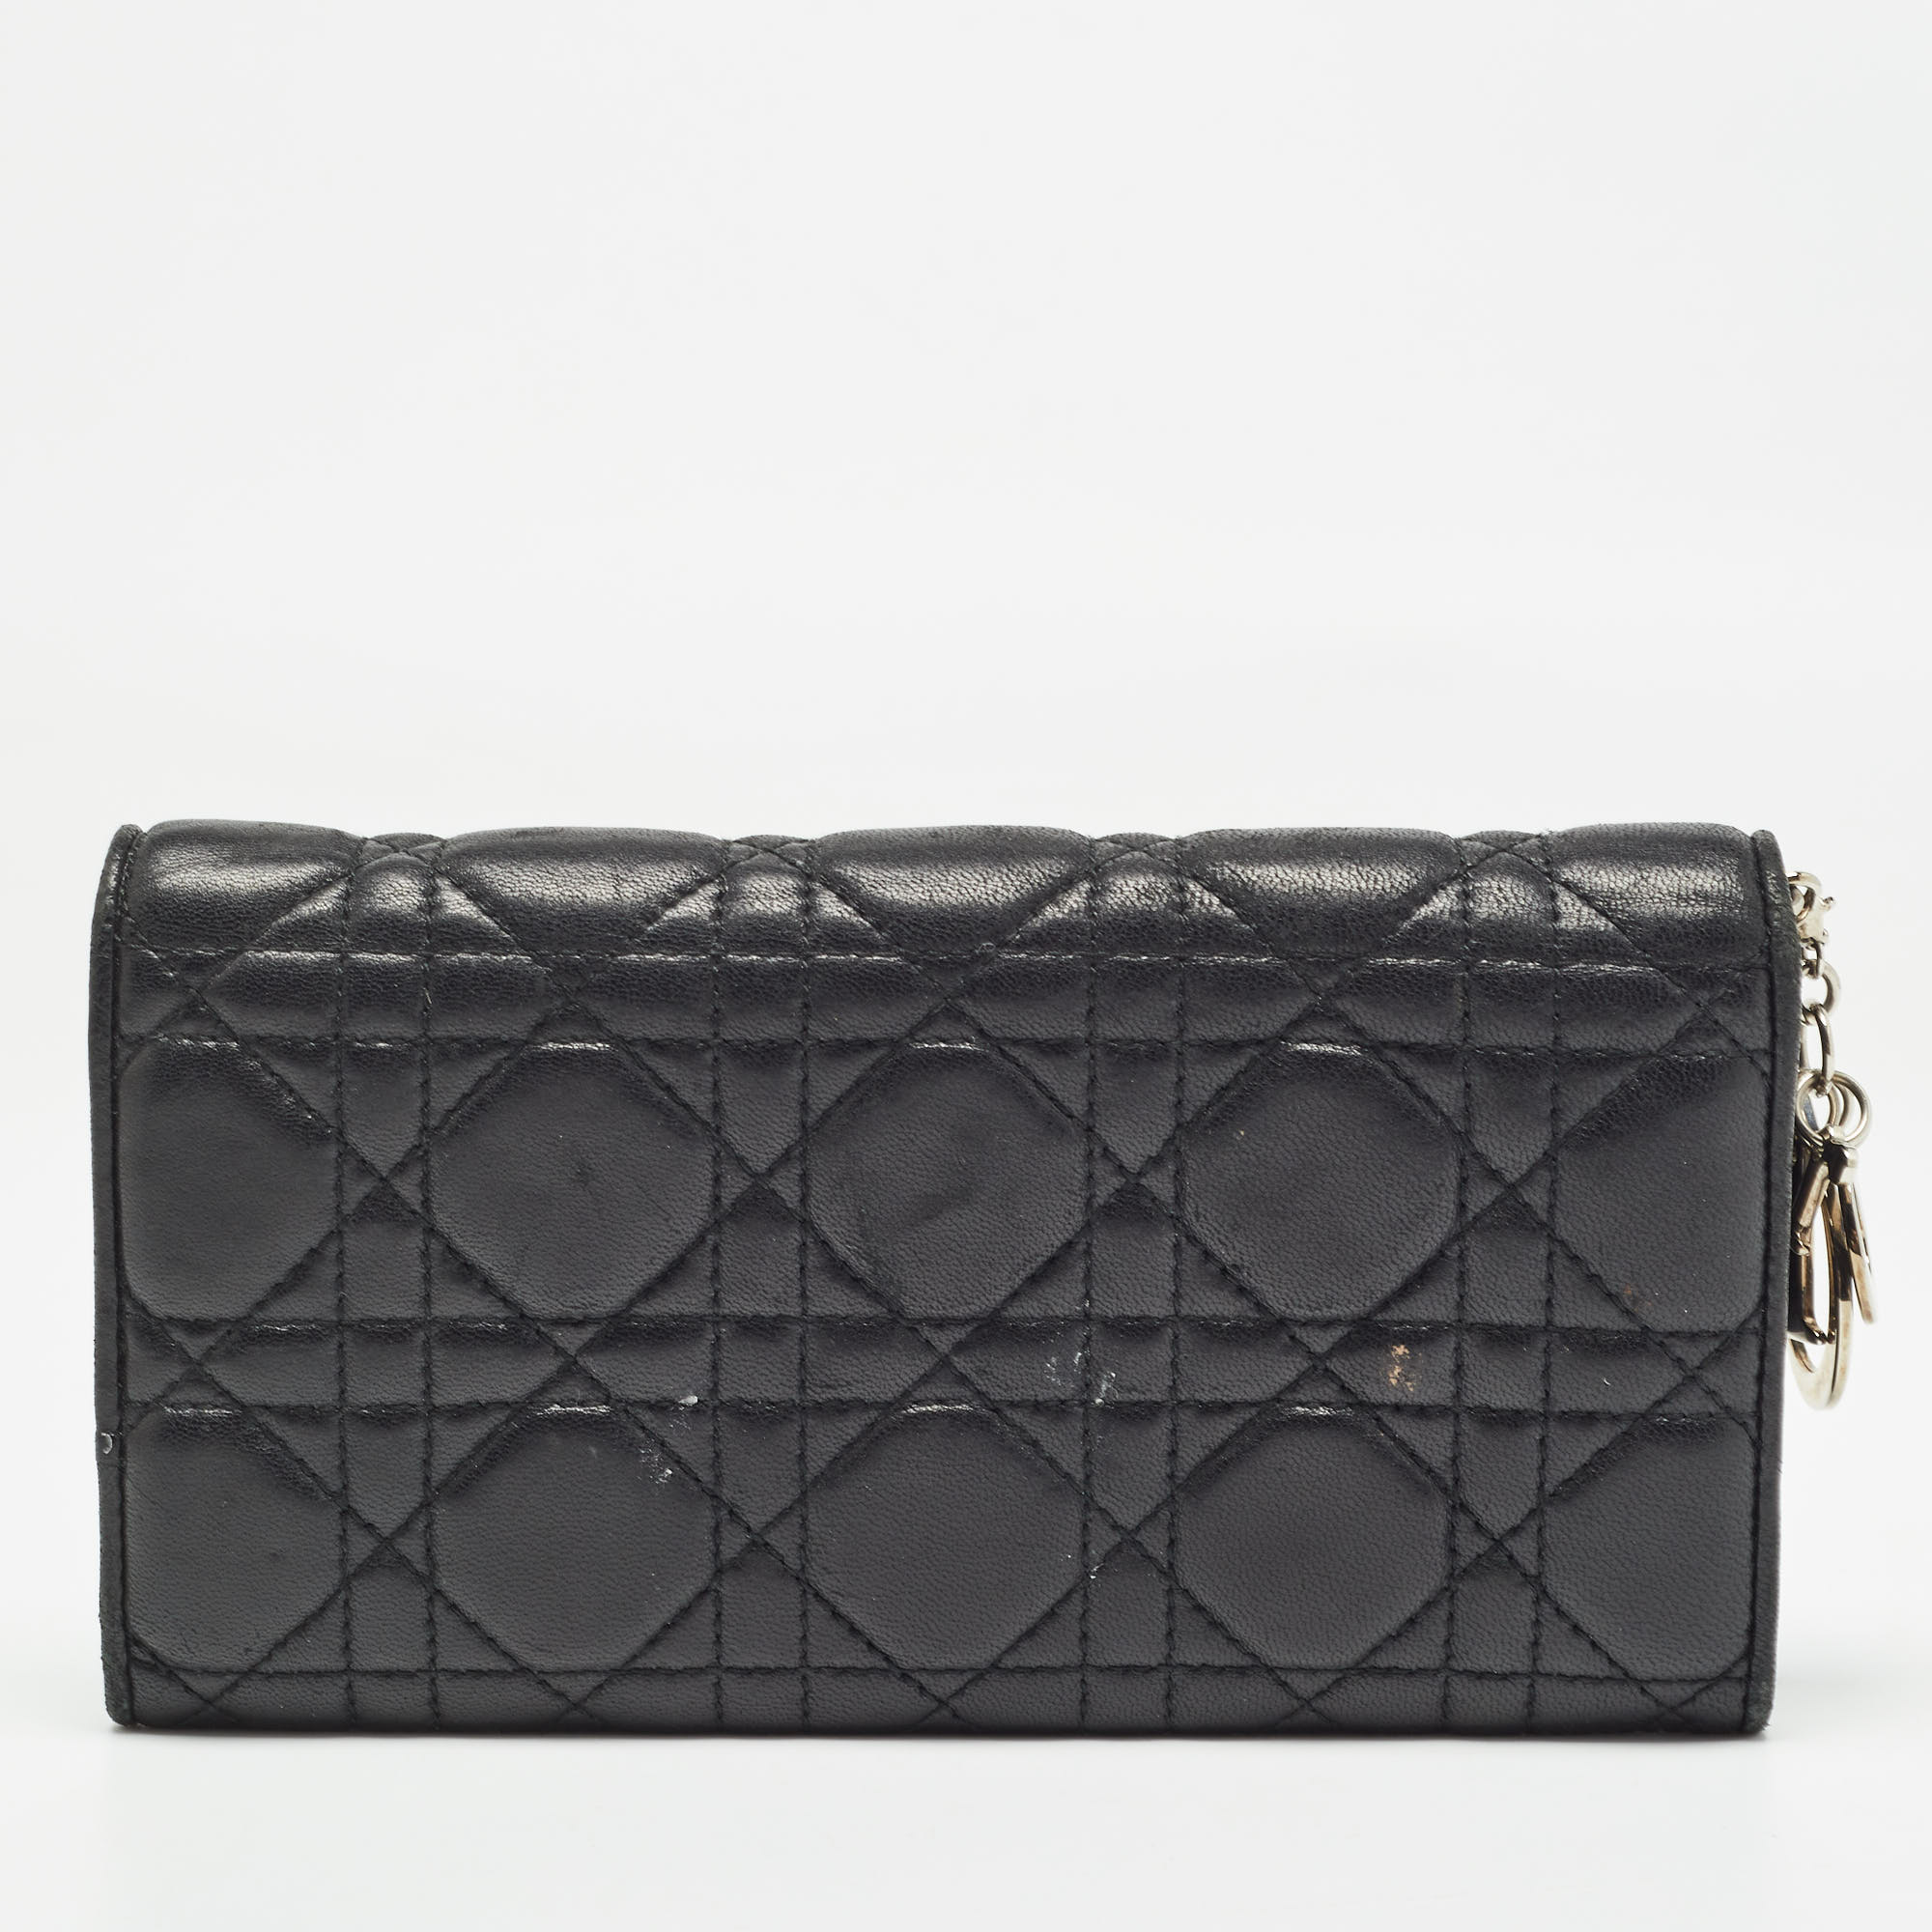 Dior black cannage leather lady dior continental wallet